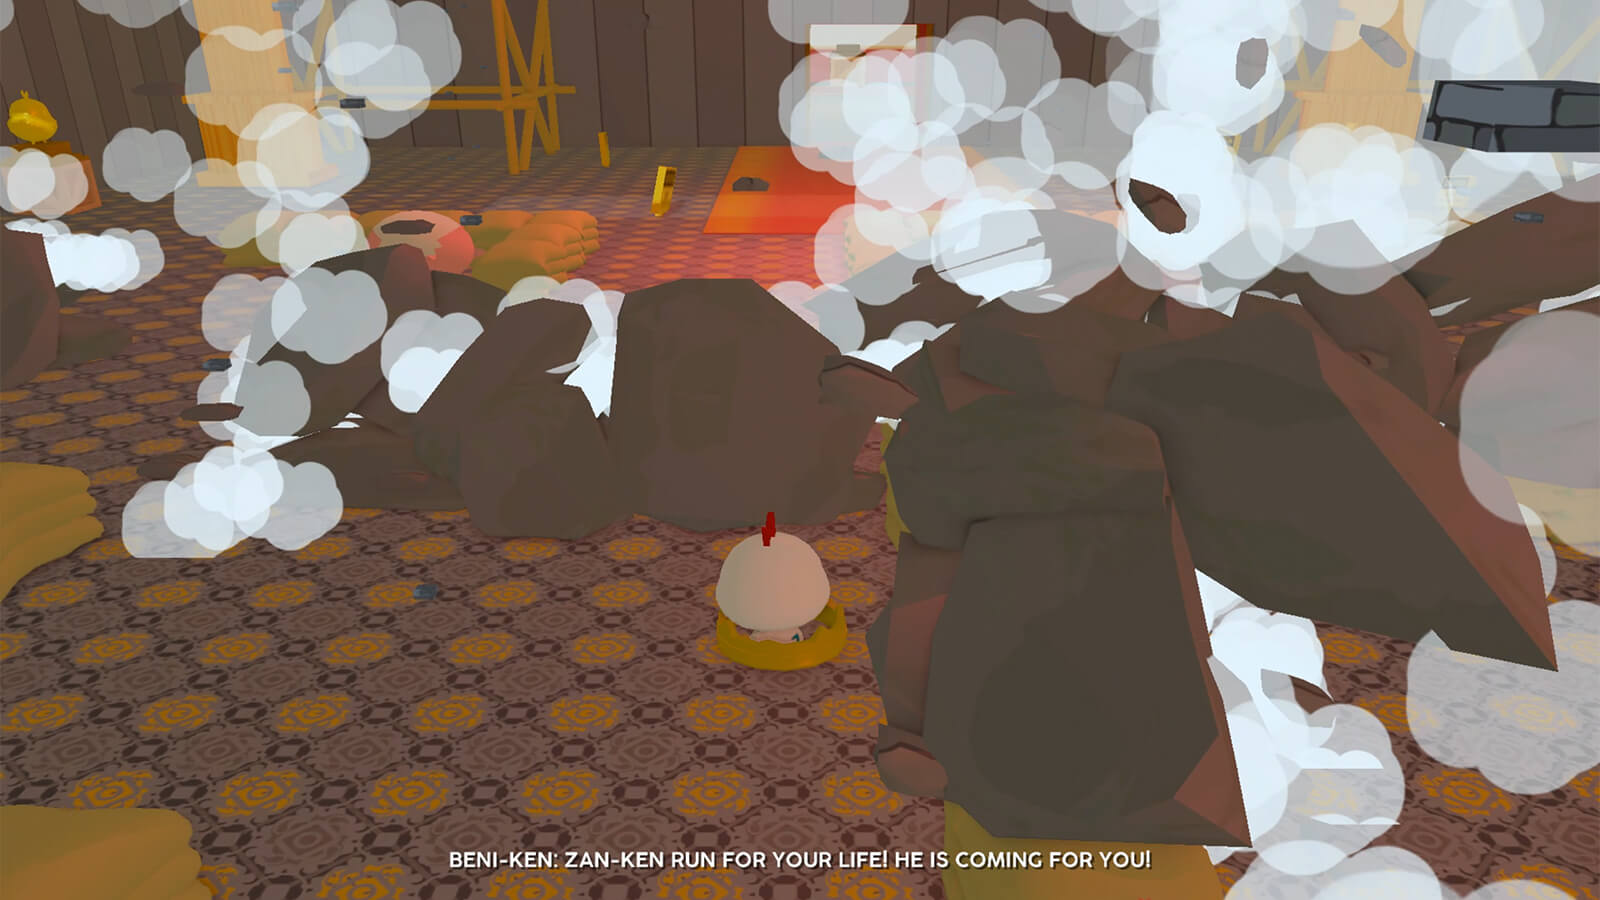 Seen from behind, dust clouds surround a small white chicken holding a golden crown as rocks fall all around it.